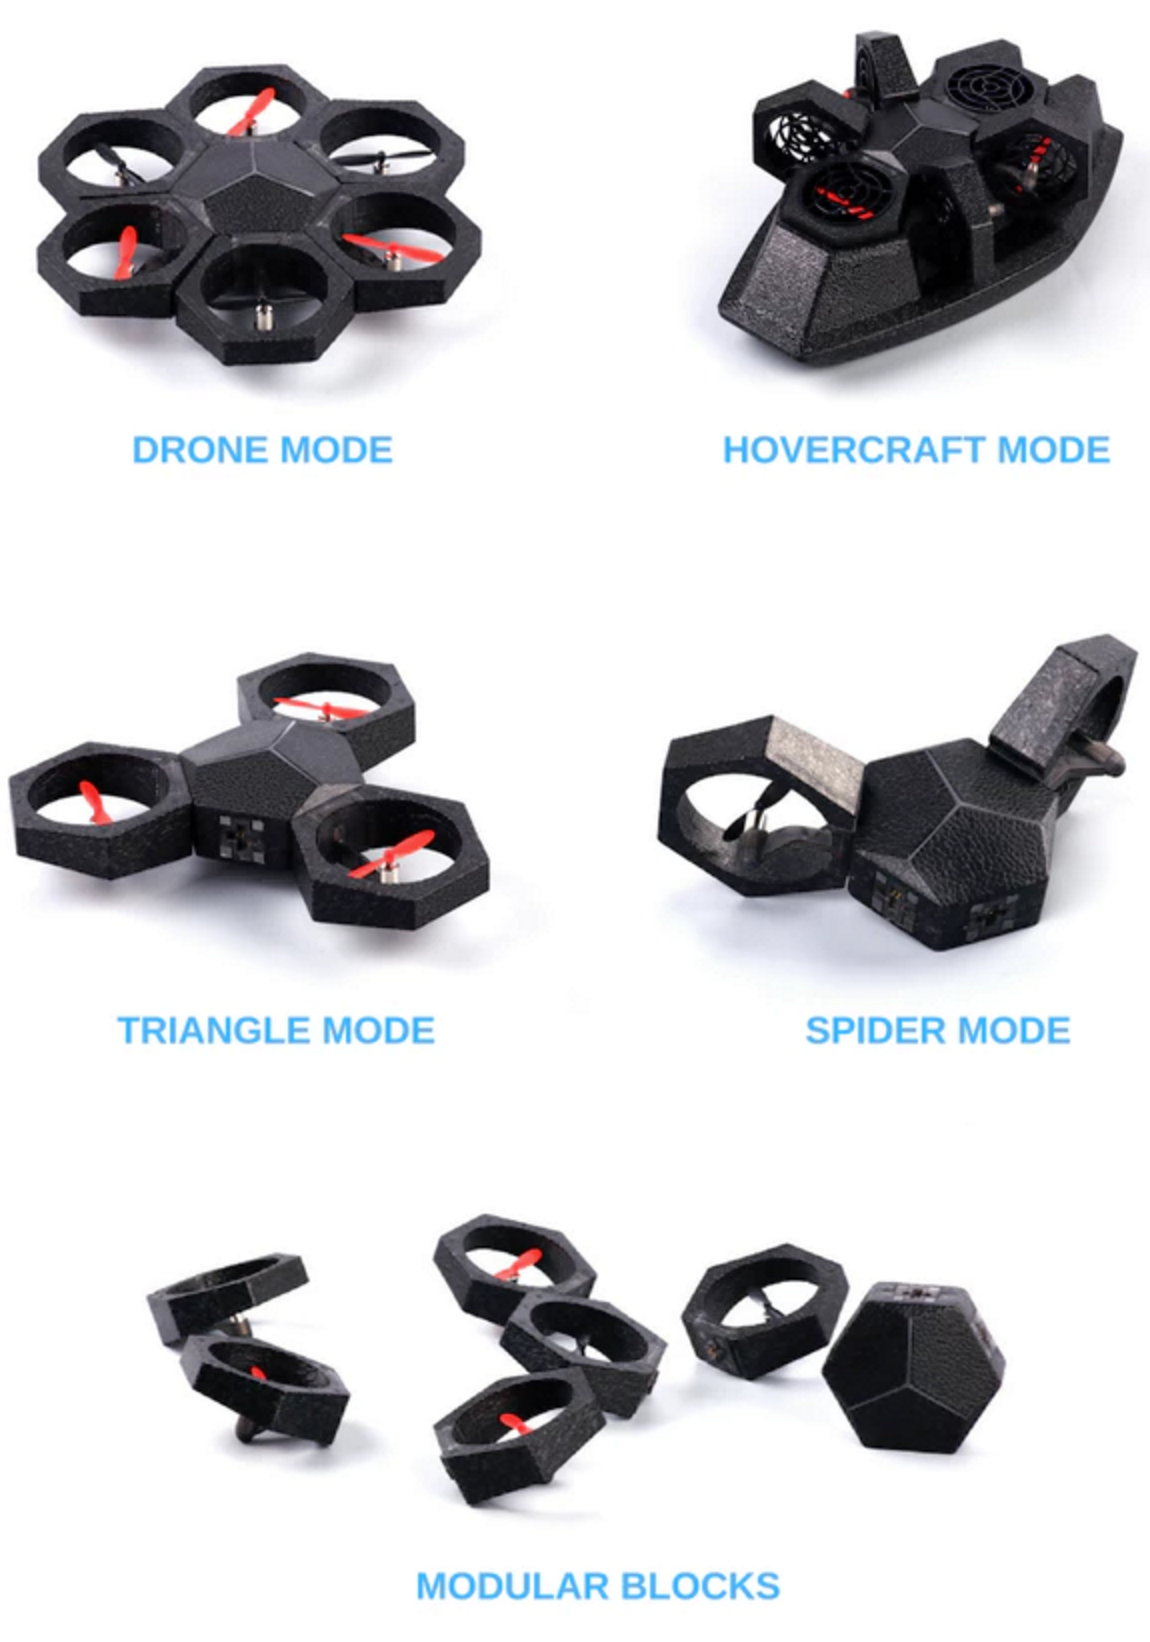 Airblock, a modular and programmable Drone